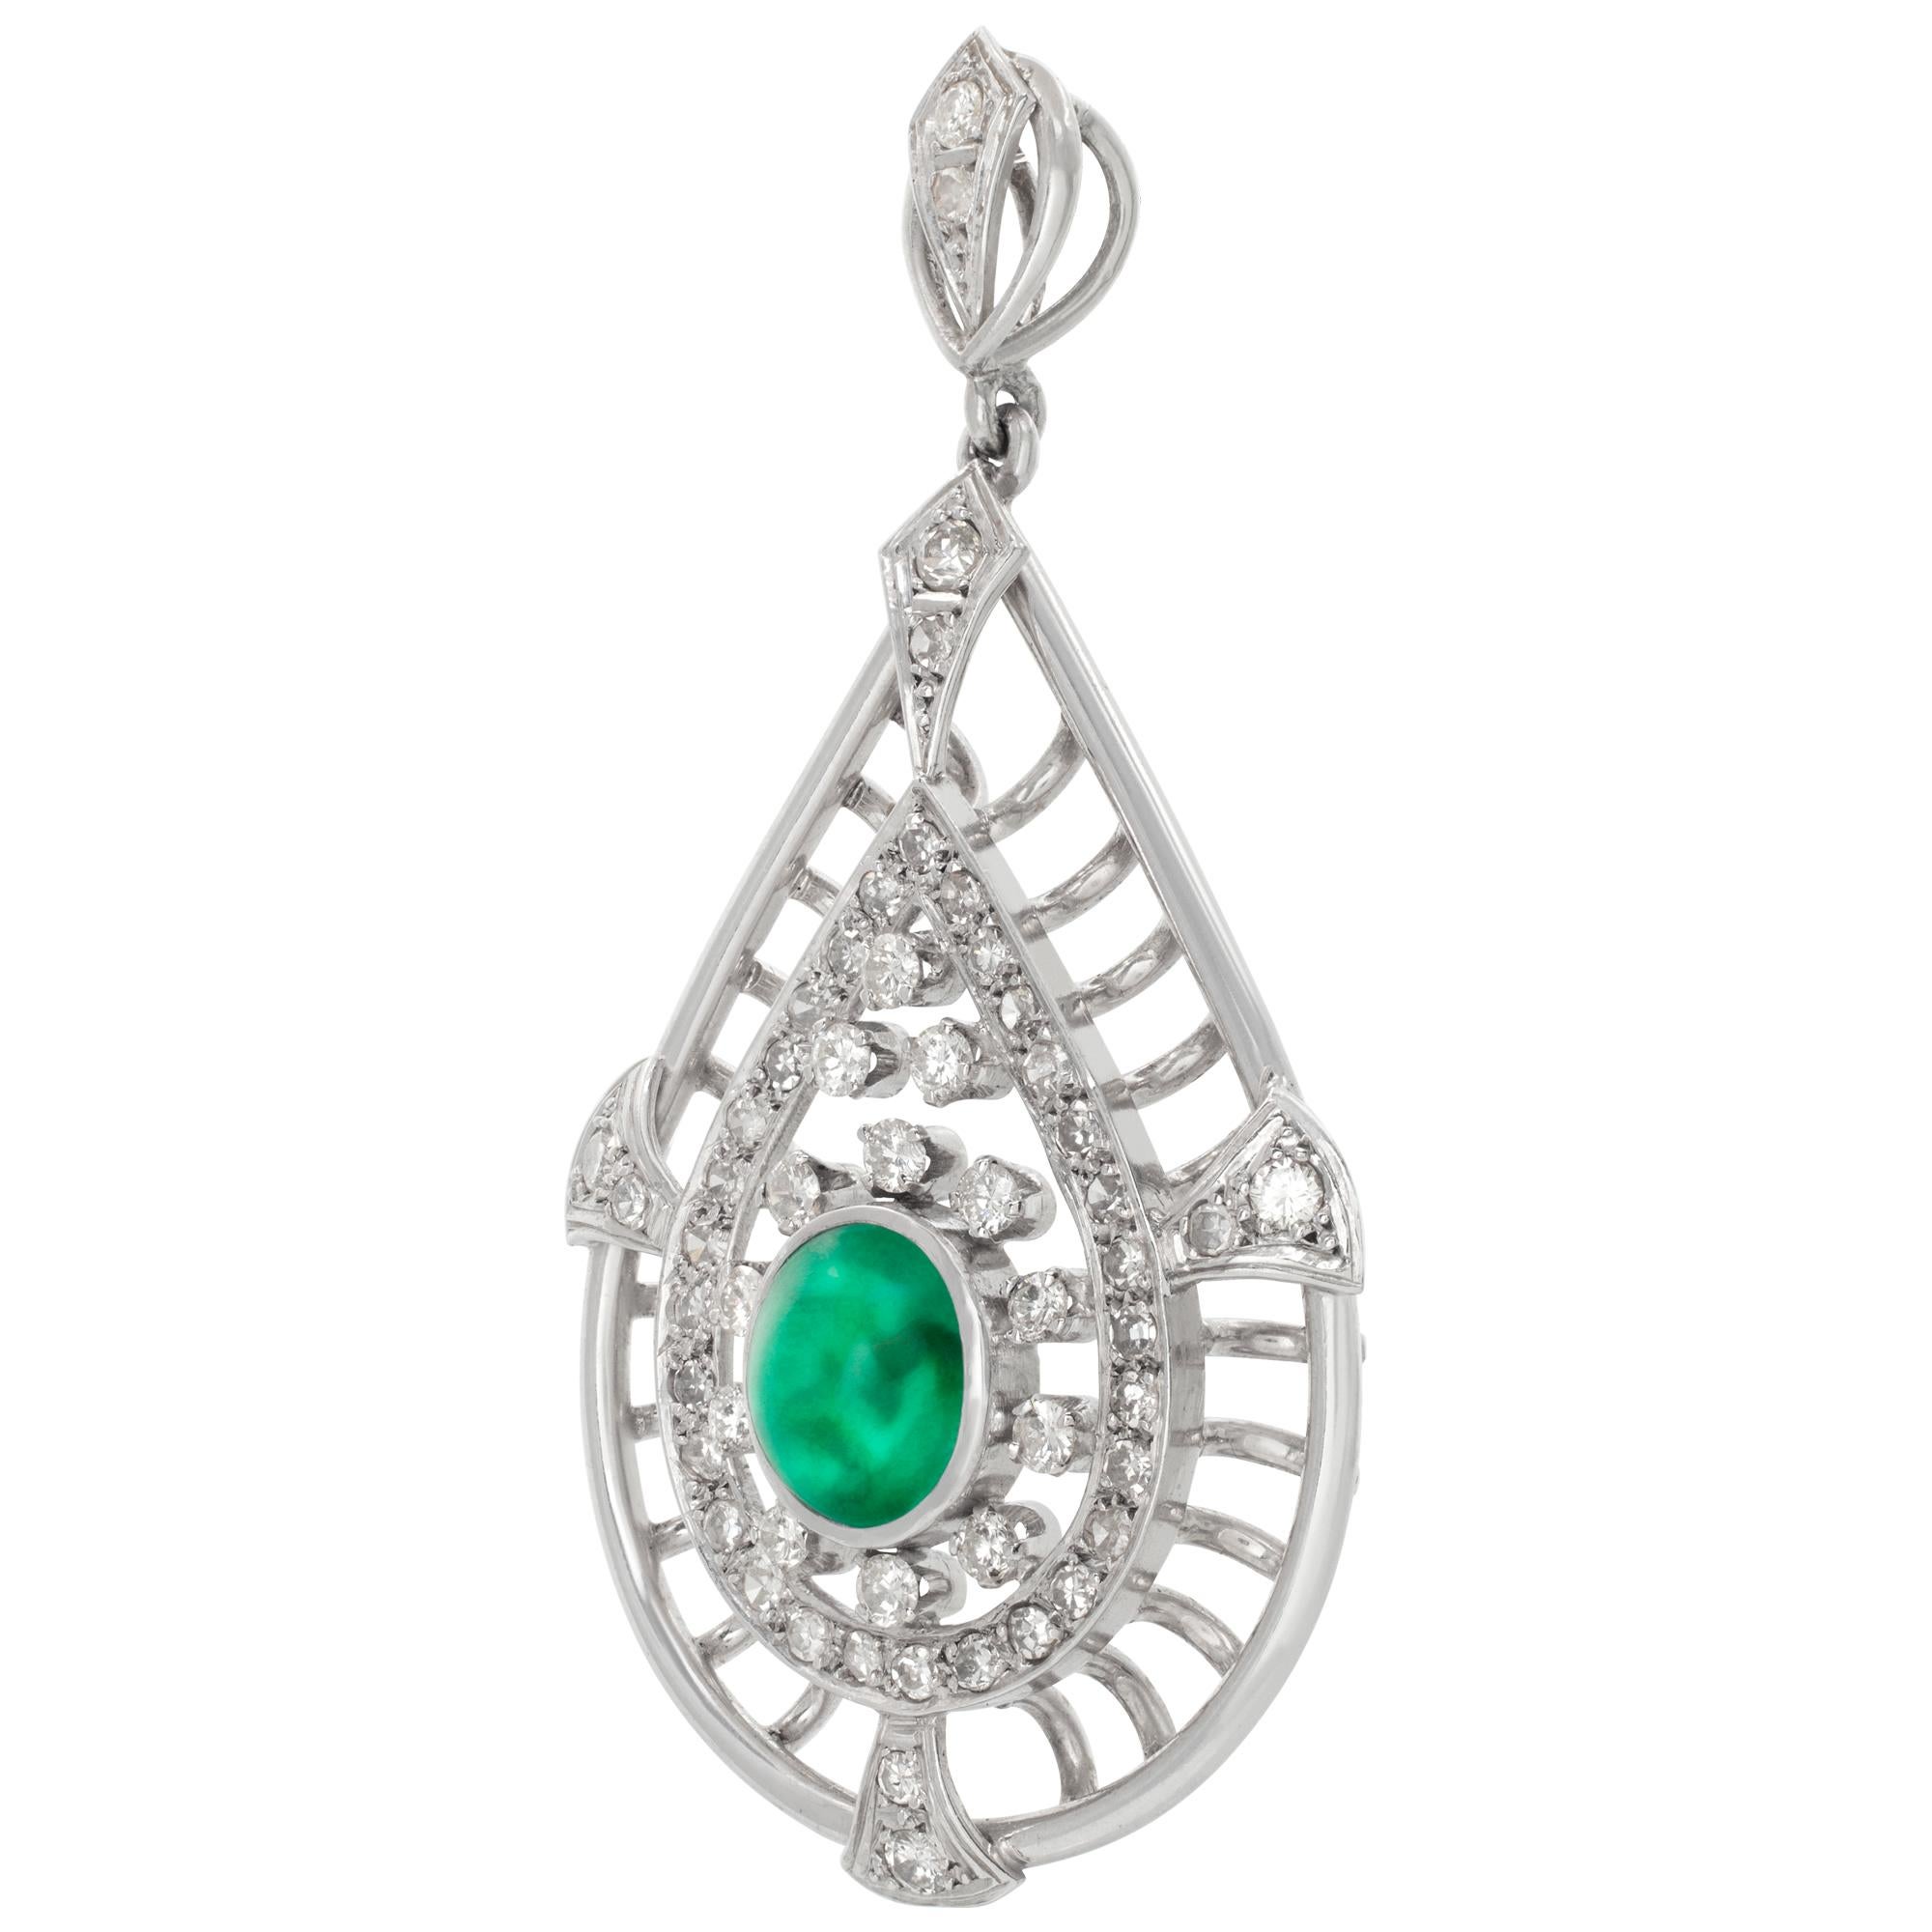 18k white gold tear drop brooch with center 2.0 ct cabachon emerald and approx 2 cts in G-H color, VS-SI clarity  diamonds. Measures 2 inches. Width 1.25 inches.
